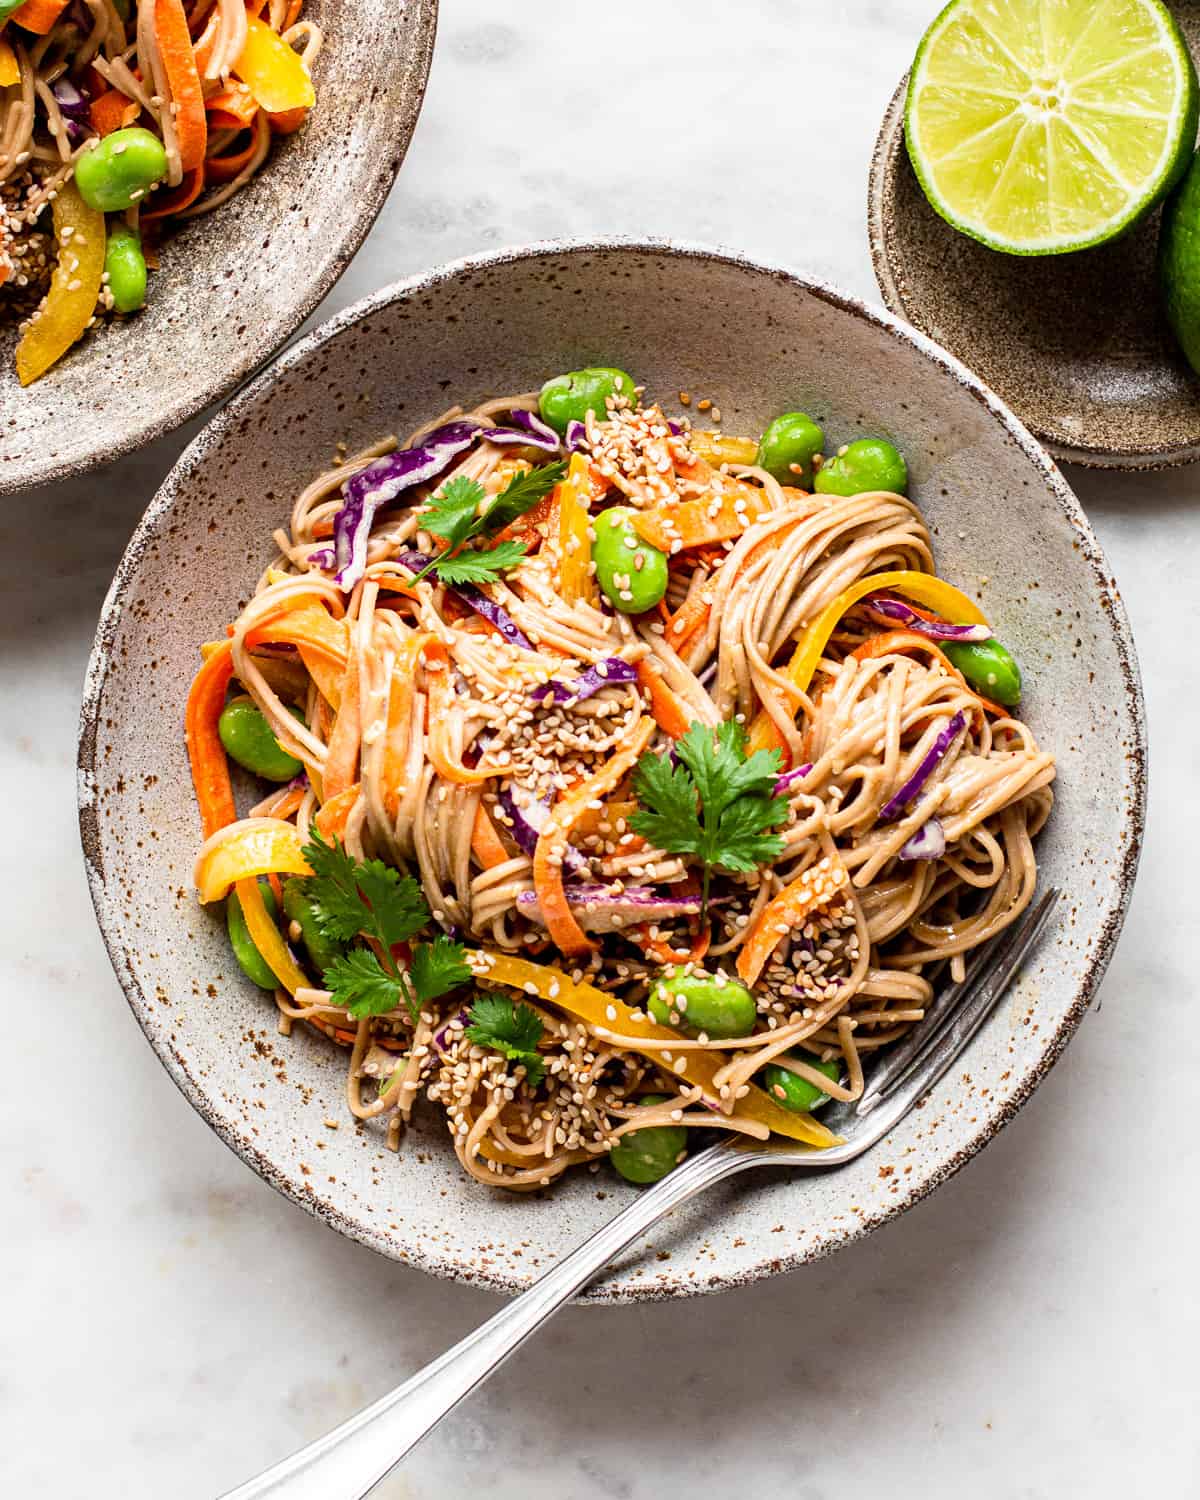 Buckwheat noodle salad in a grey ceramic bowl topped with sesame seeds and fresh cilantro.